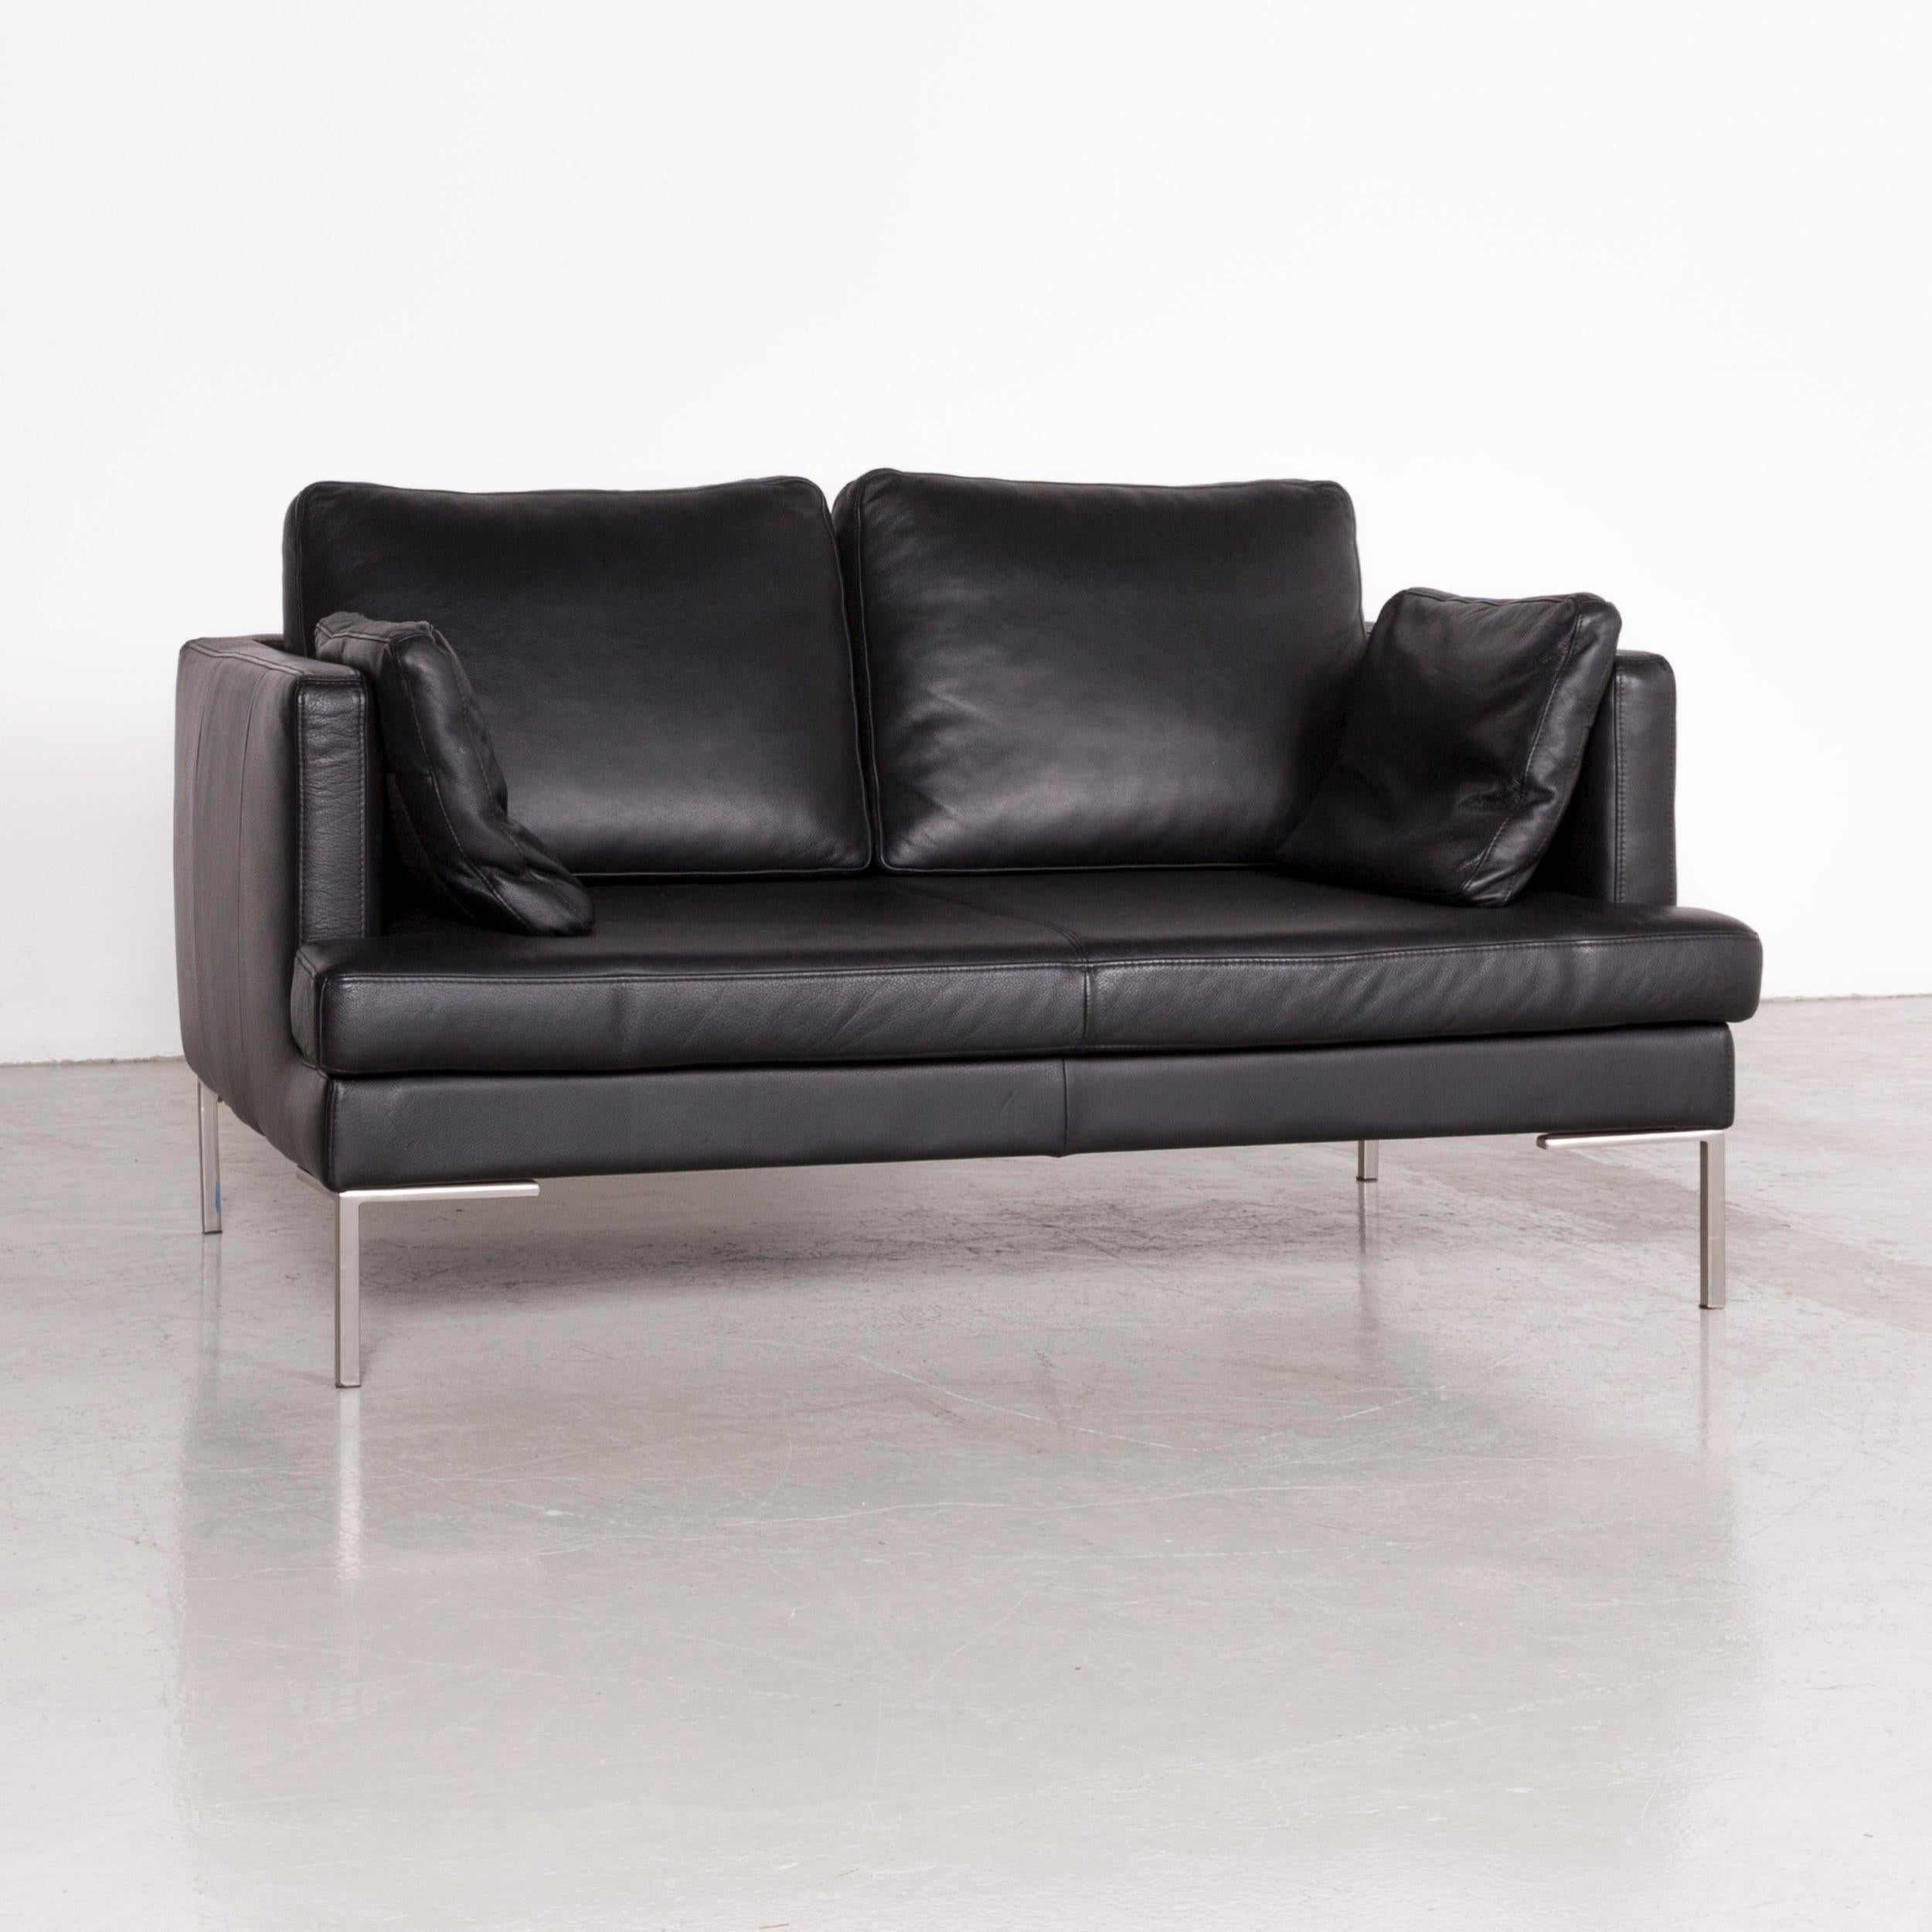 Boconcept designer leather sofa black two-seat couch.